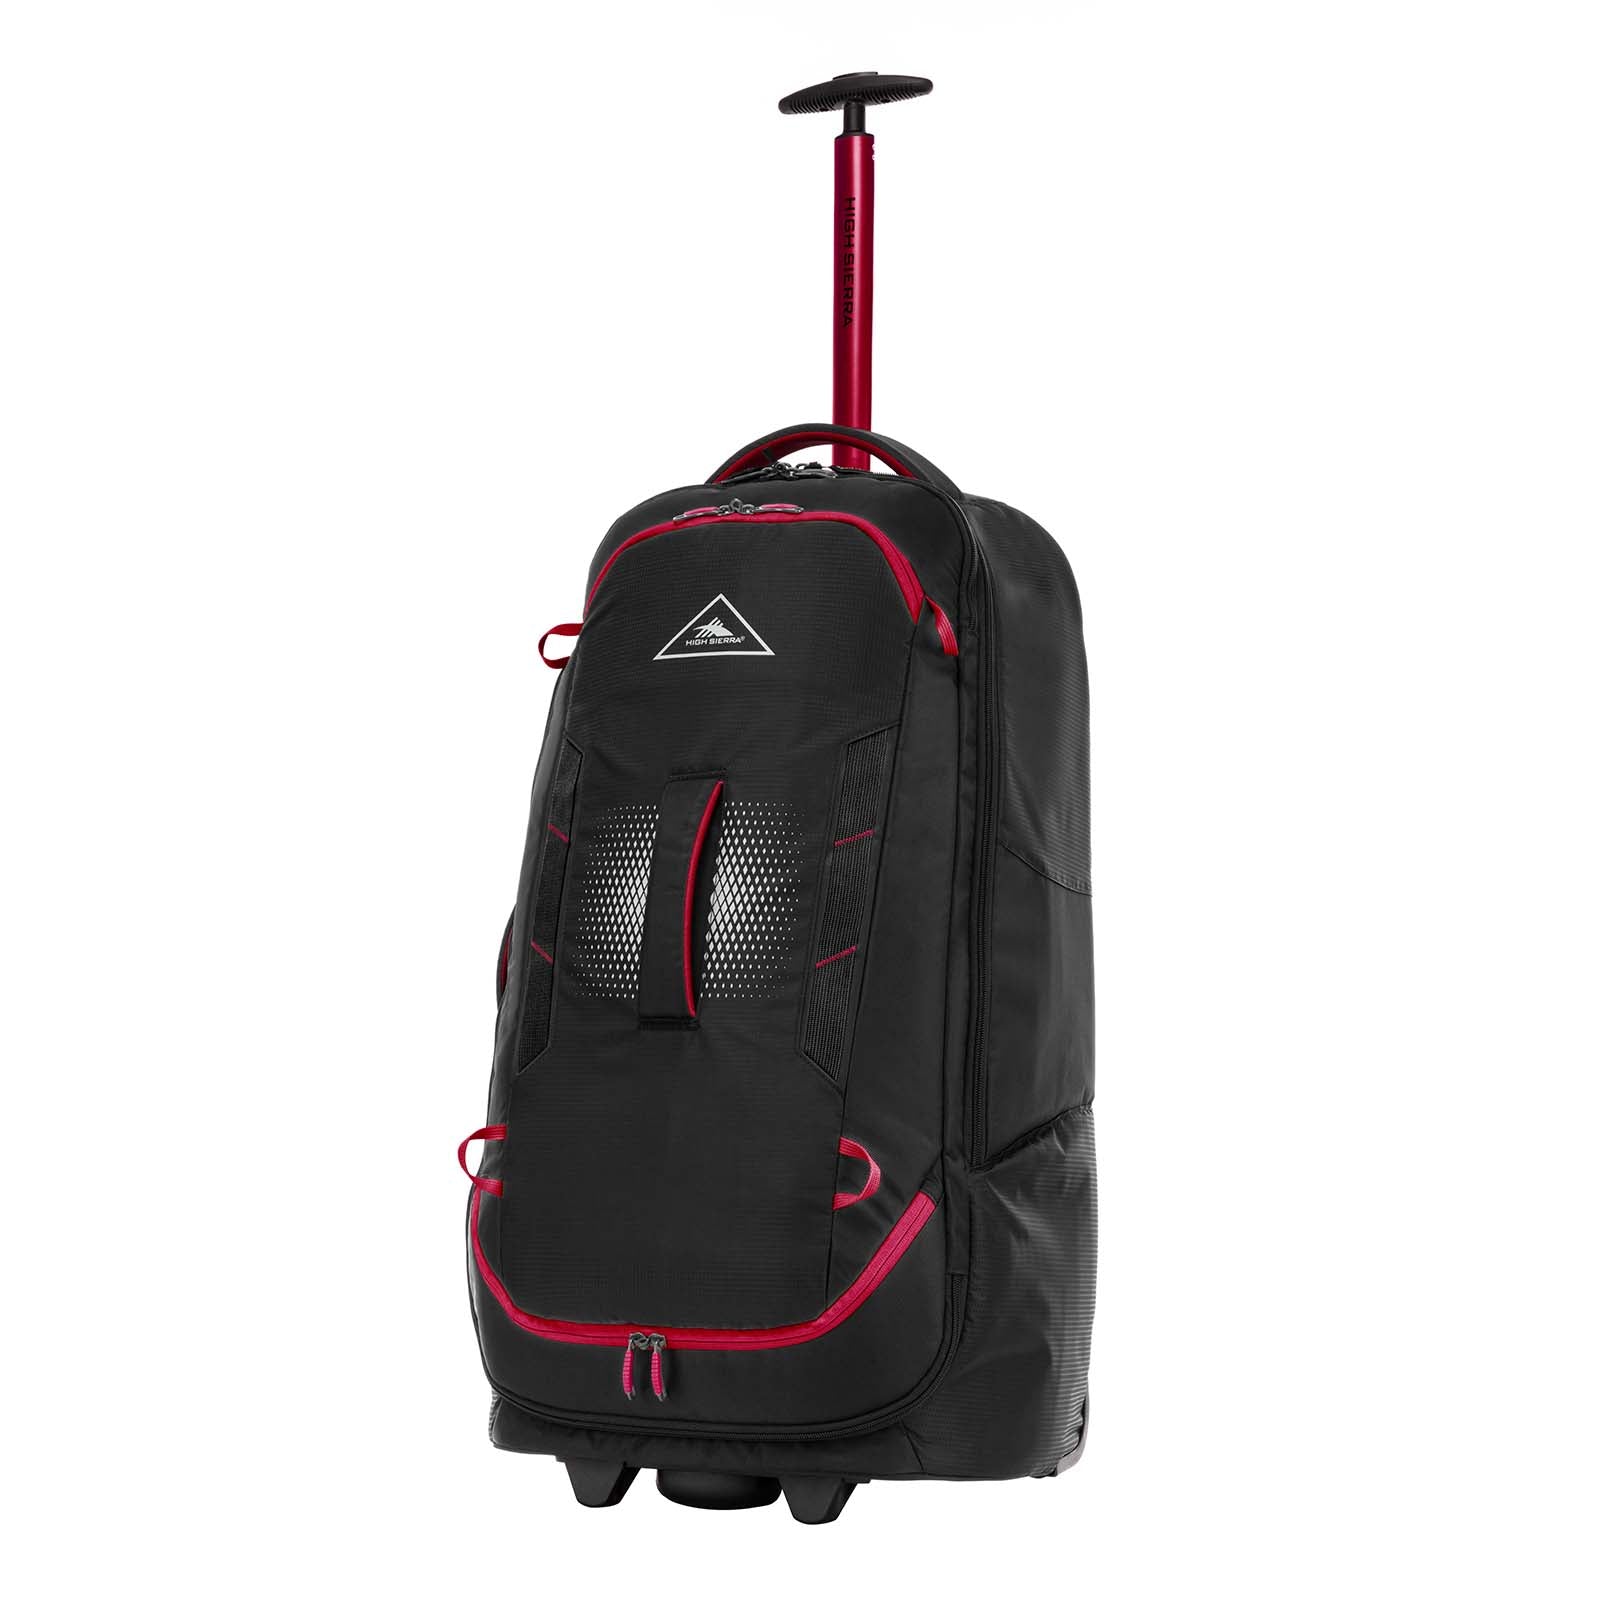    High_Sierra_Composite_V4_76cm_Carry-On_Wheeled_Duffel_Black_Red_Front